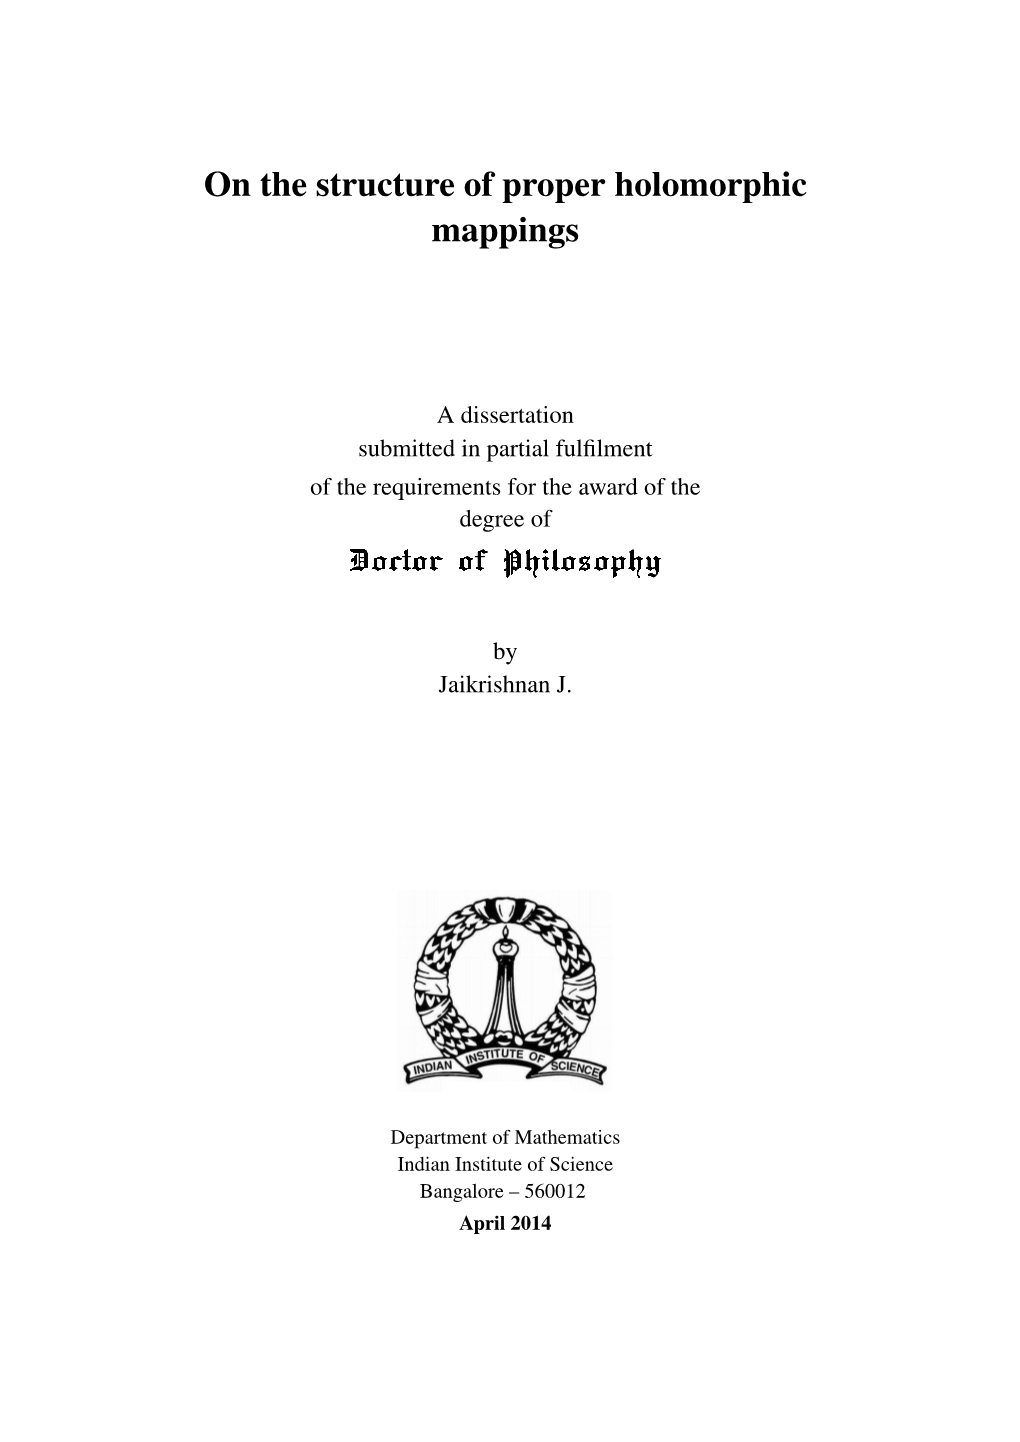 On the Structure of Proper Holomorphic Mappings Doctor of Philosophy